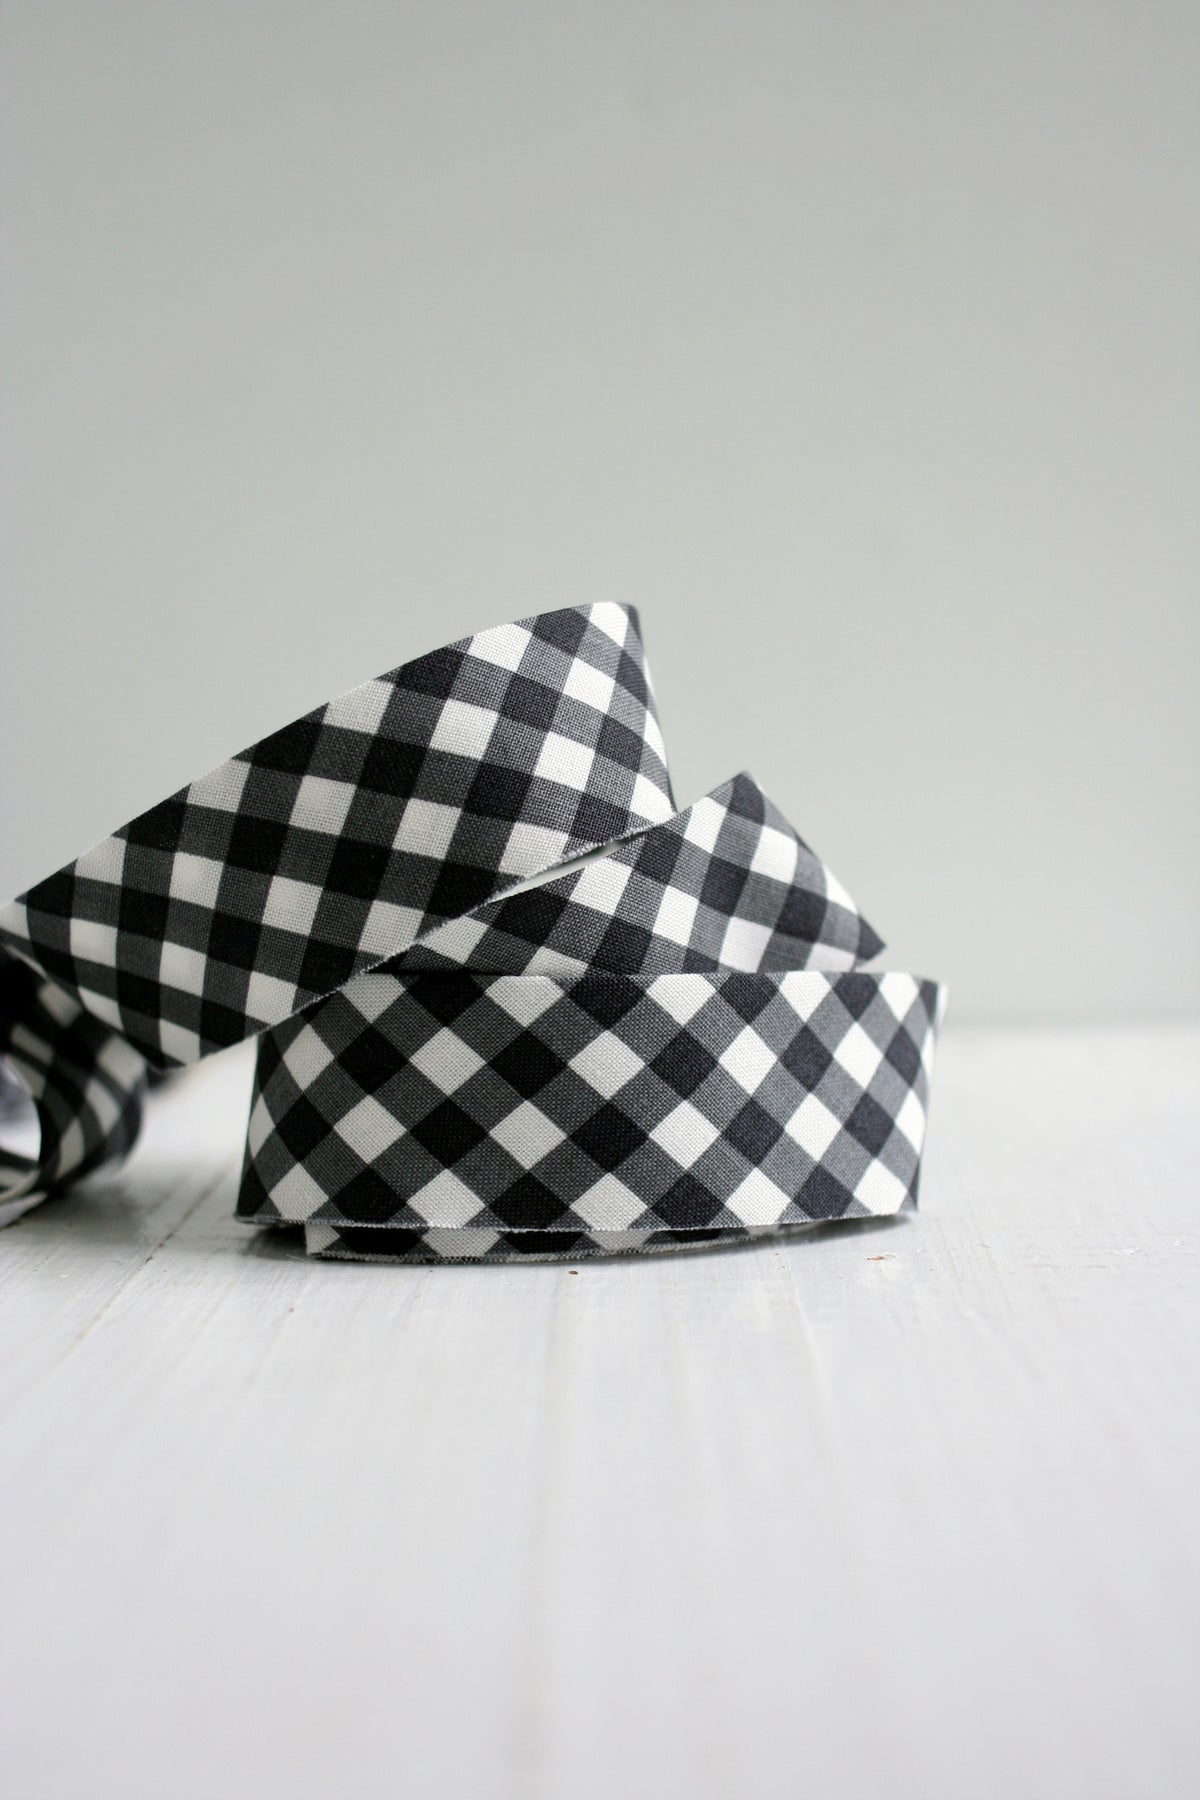 SALE Black and White Gingham - 1/2&quot; bias 3 yards